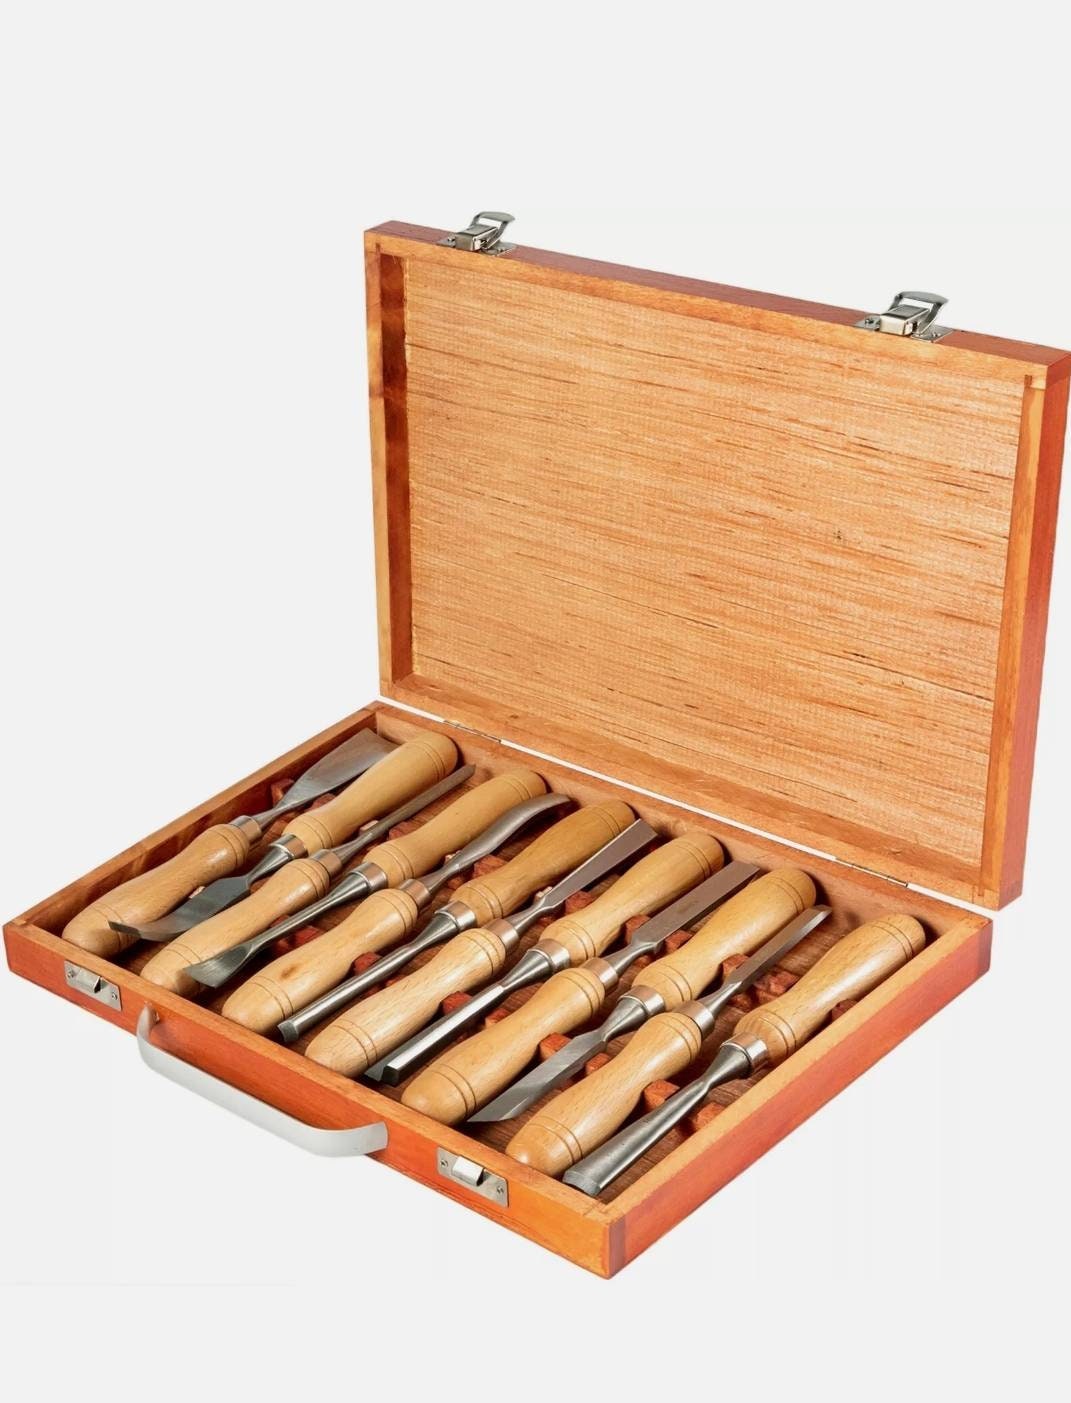 Wood carving set of 10 tools professional wood carving set